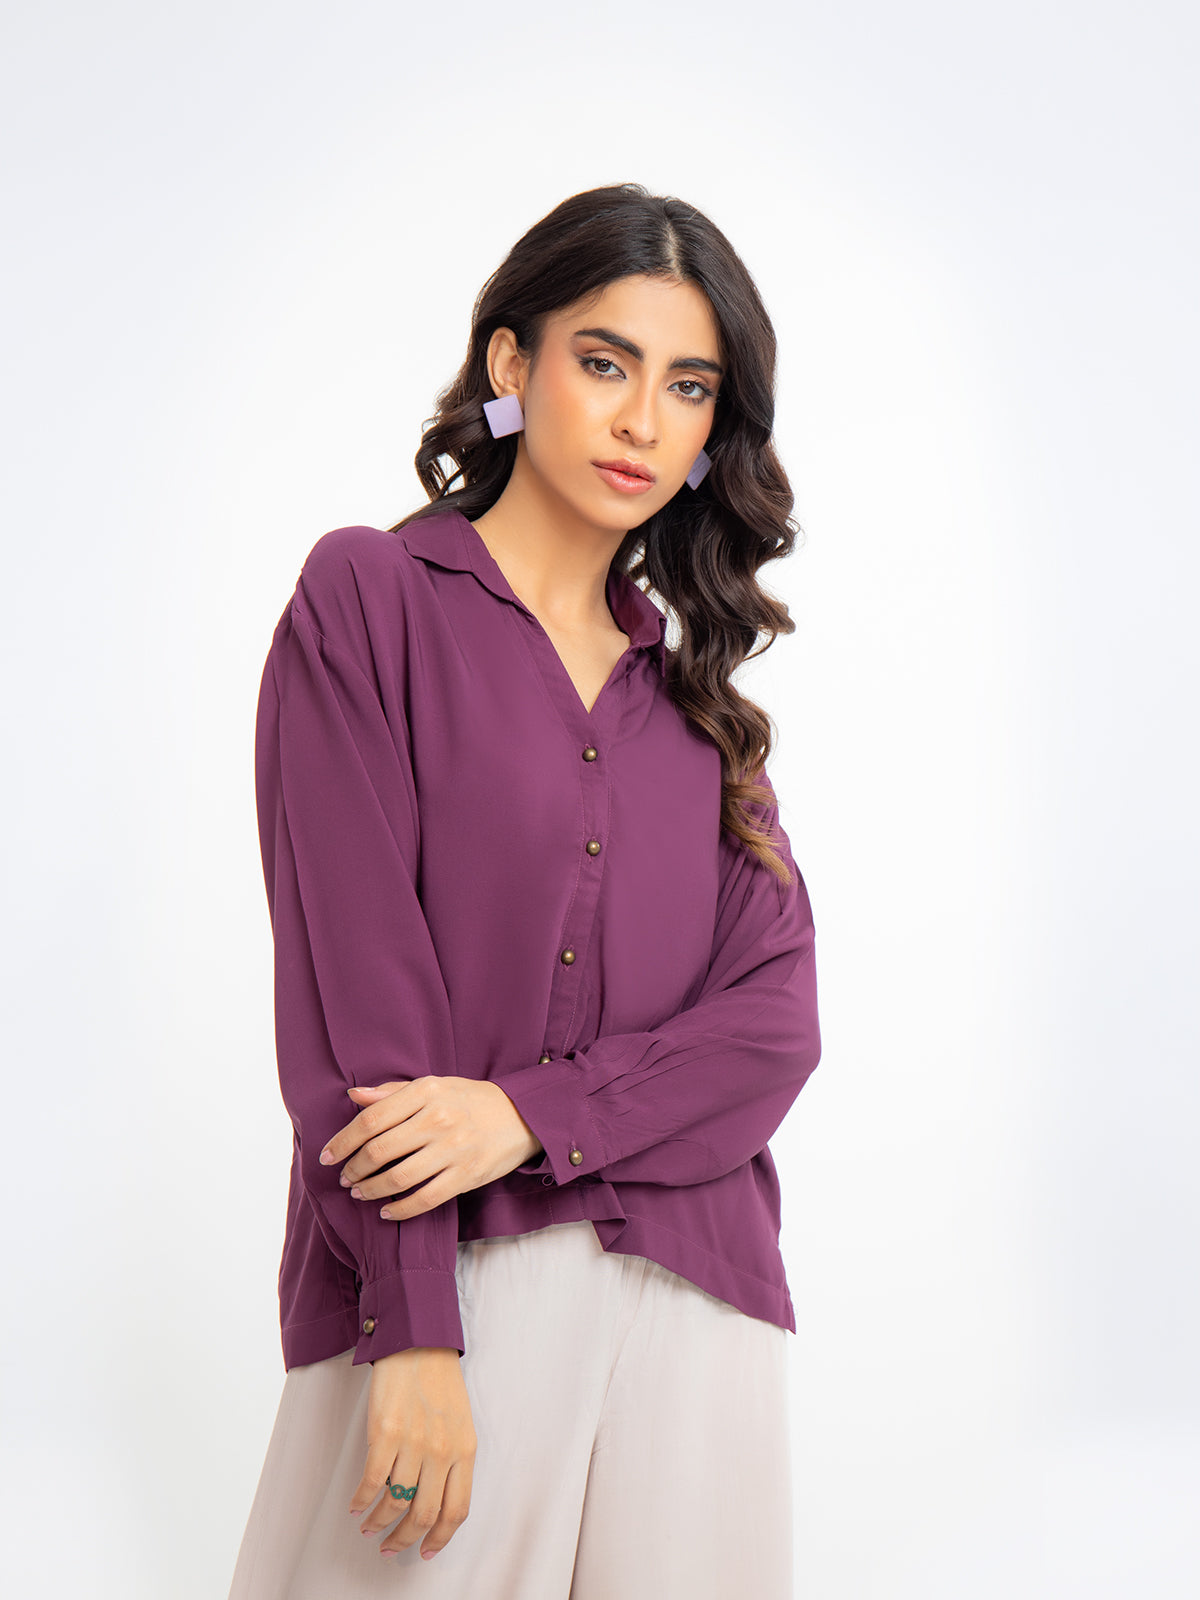 Relax Fit Western Top - FWTTB23-007